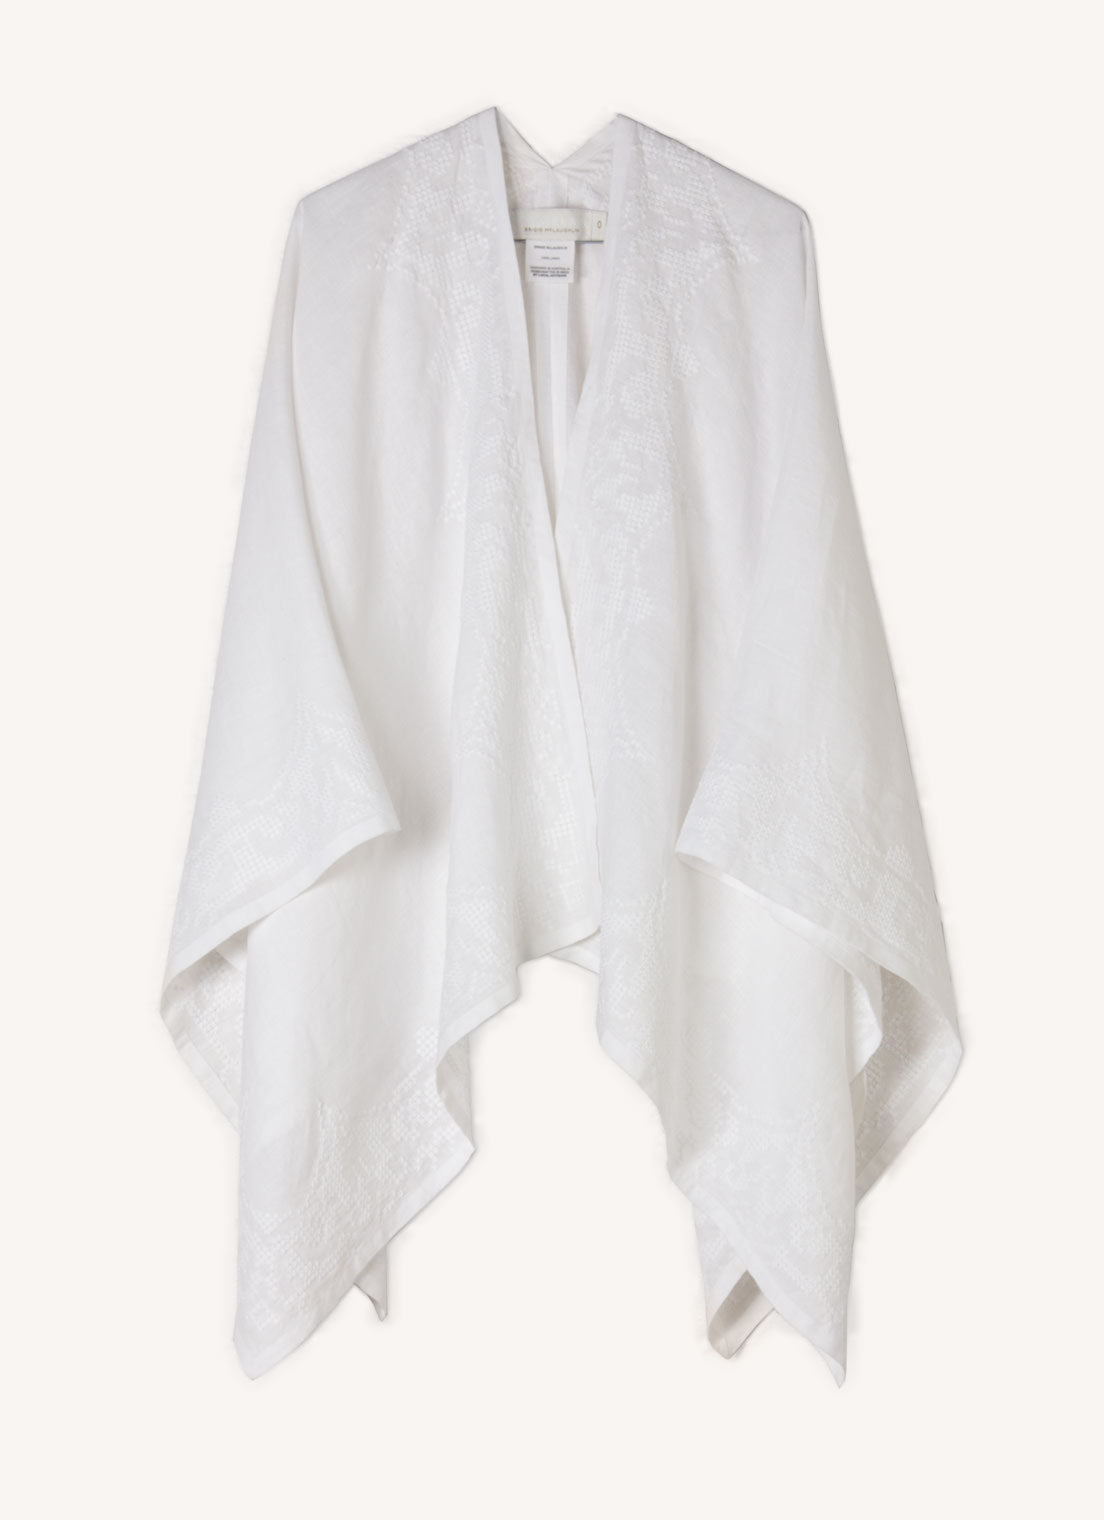 A one size, easy fit, white embroidered cape shawl made from European pure linen